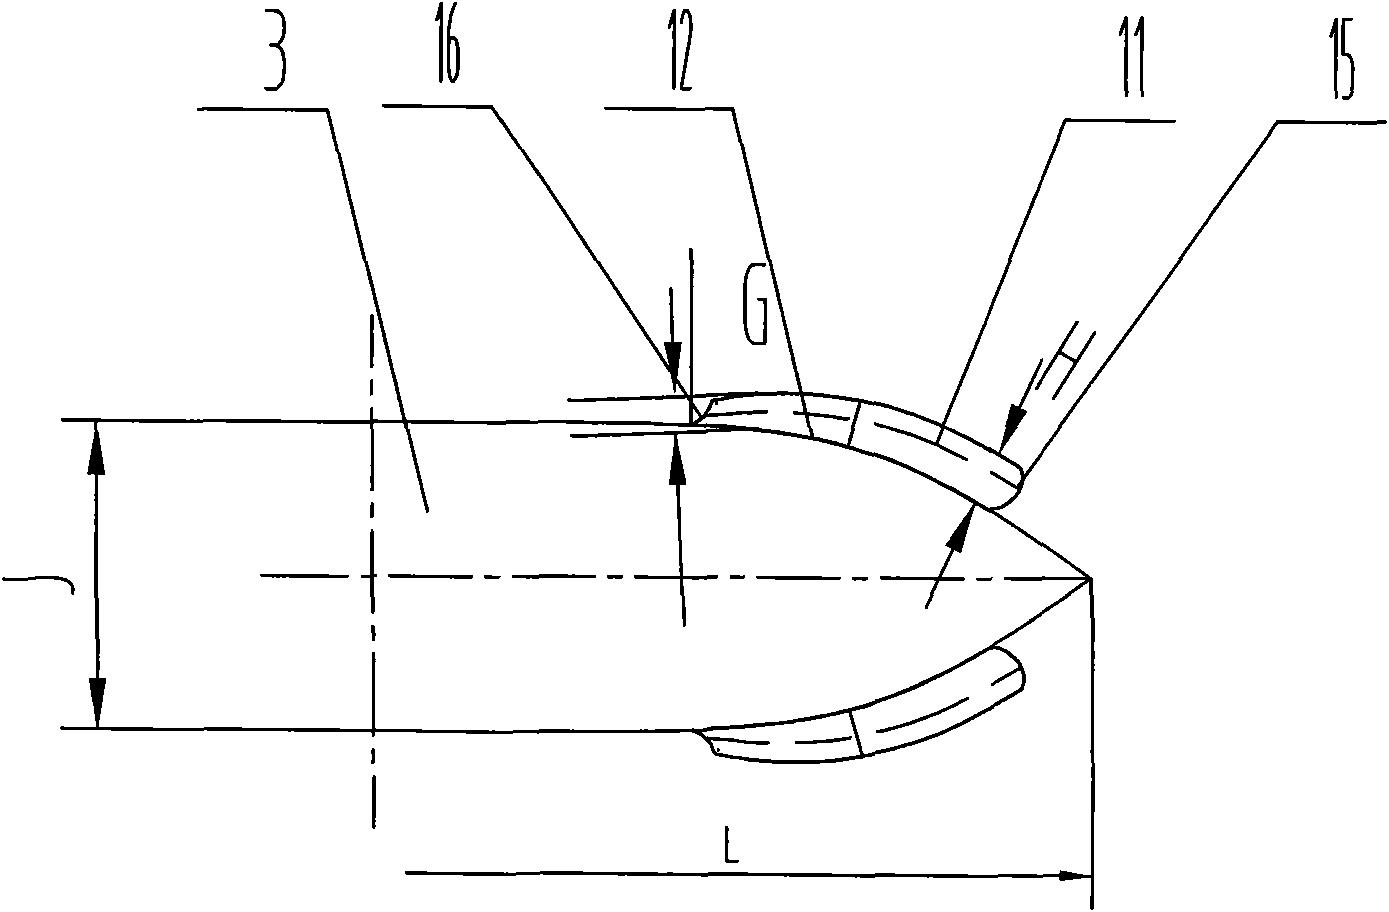 Anti-spattering bow fin of high-speed ship